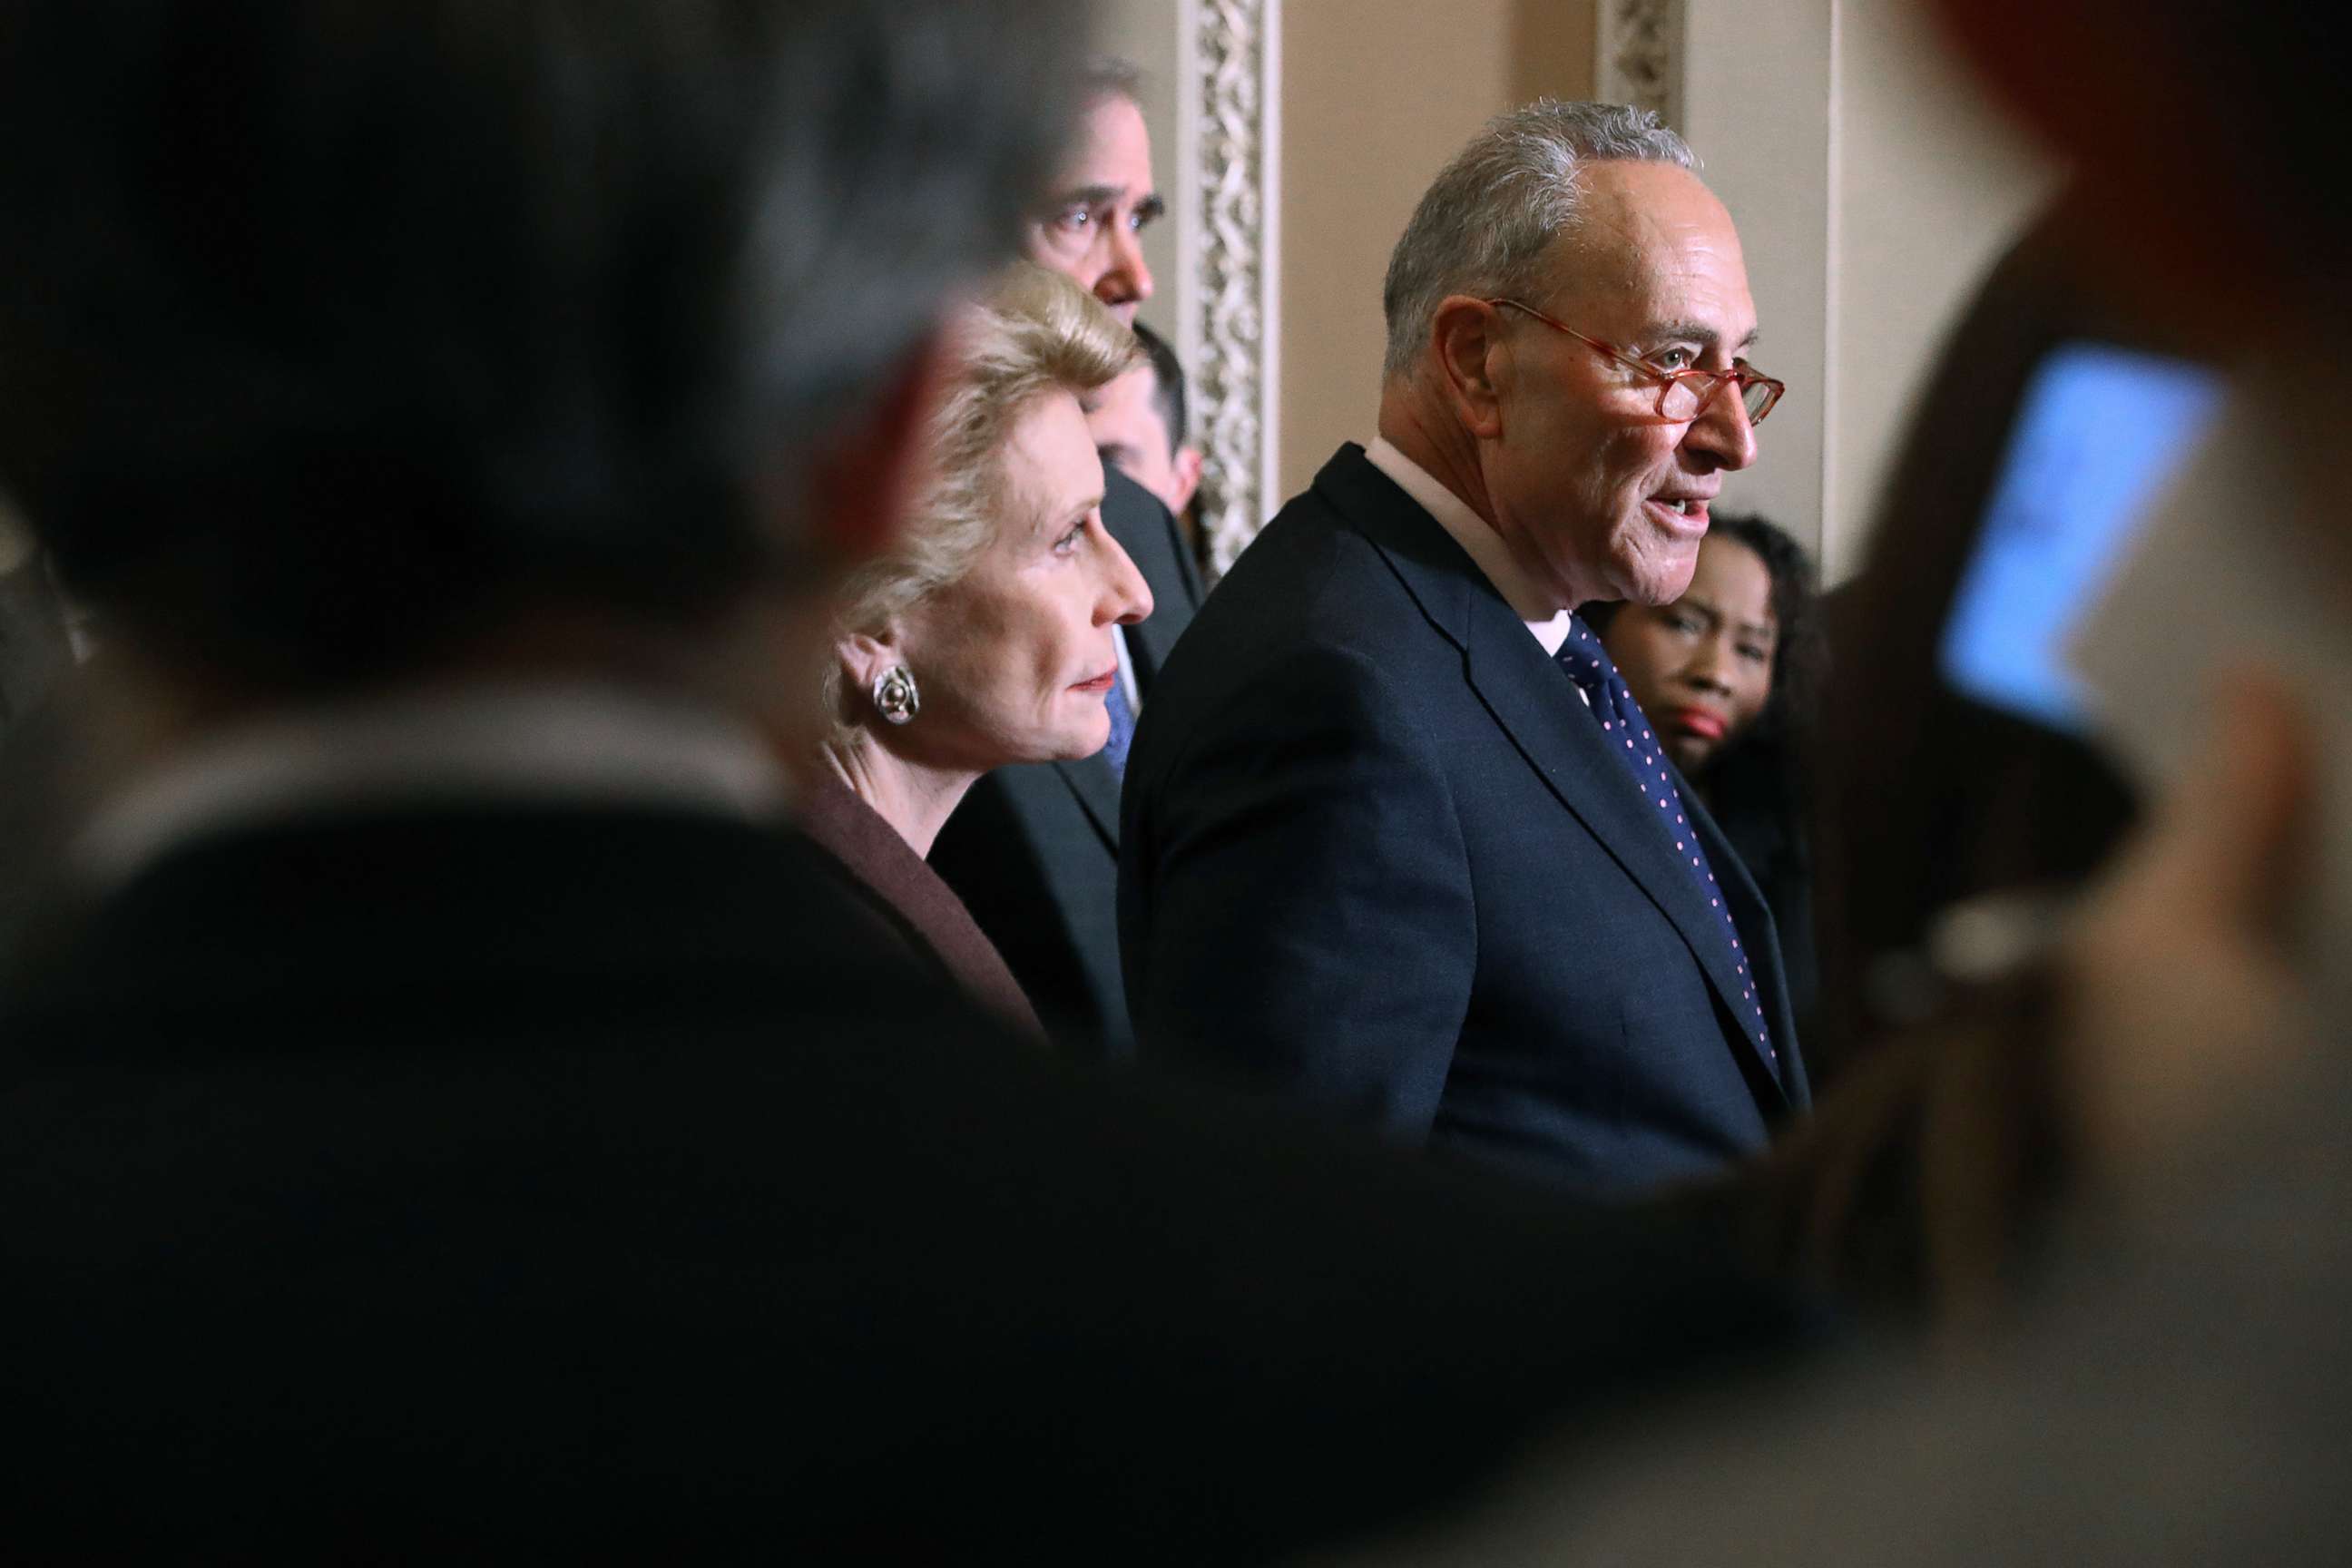 PHOTO: Senate Minority Leader Charles Schumer (D-NY) (C) talks to reporters following the weekly Senate Democratic policy luncheon at the Capitol, Jan. 7, 2020, in Washington, D.C.